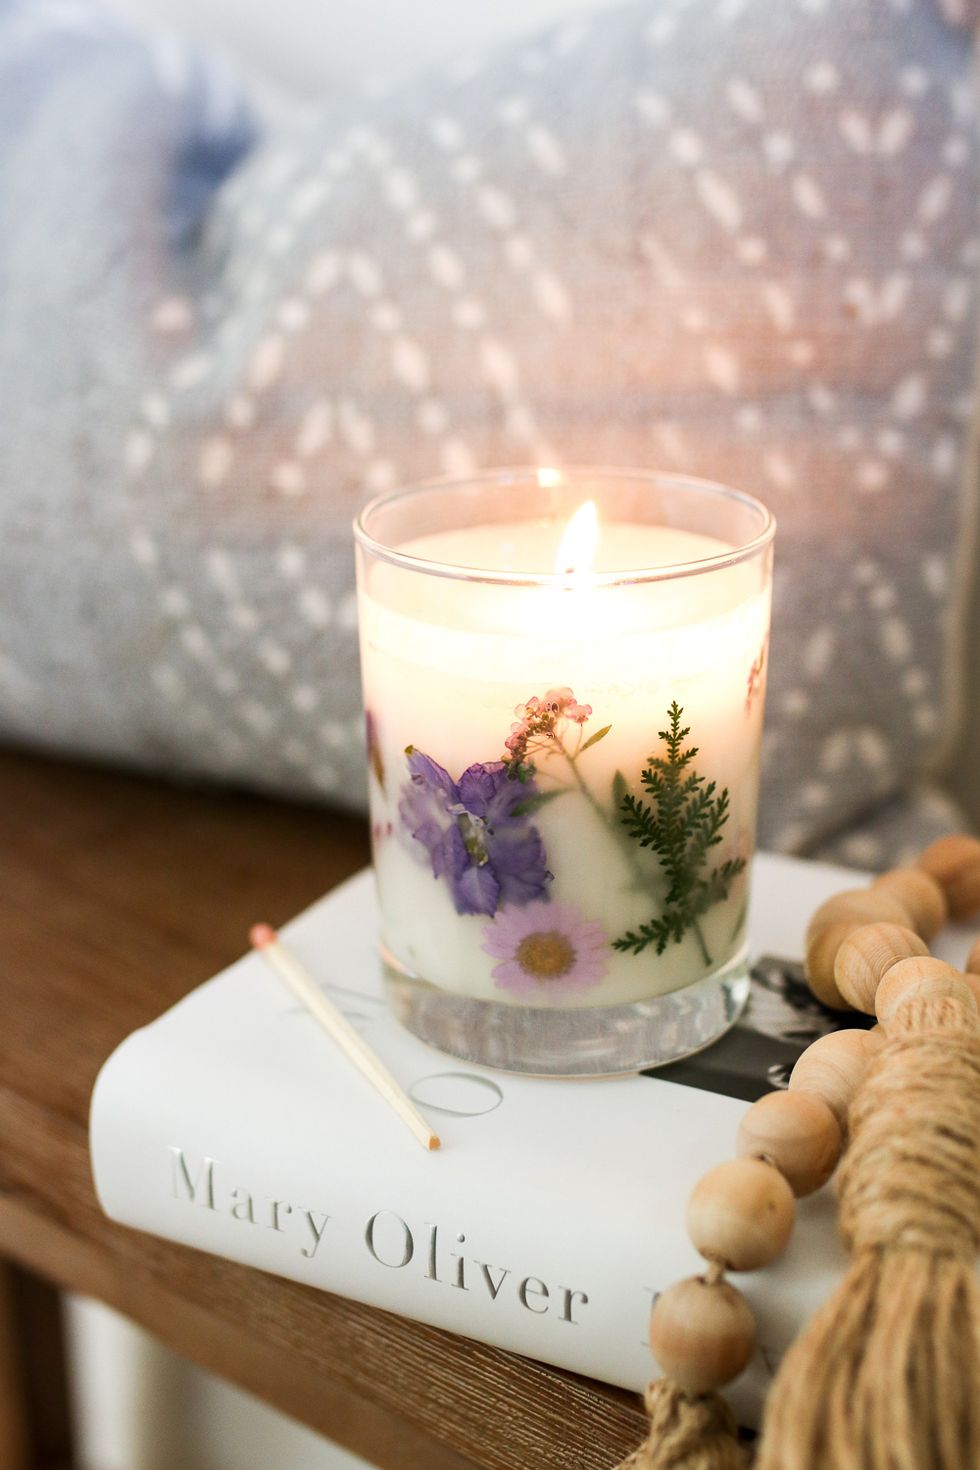 Is It Safe To Put Dried Flowers In Candles? (Explained and Solved